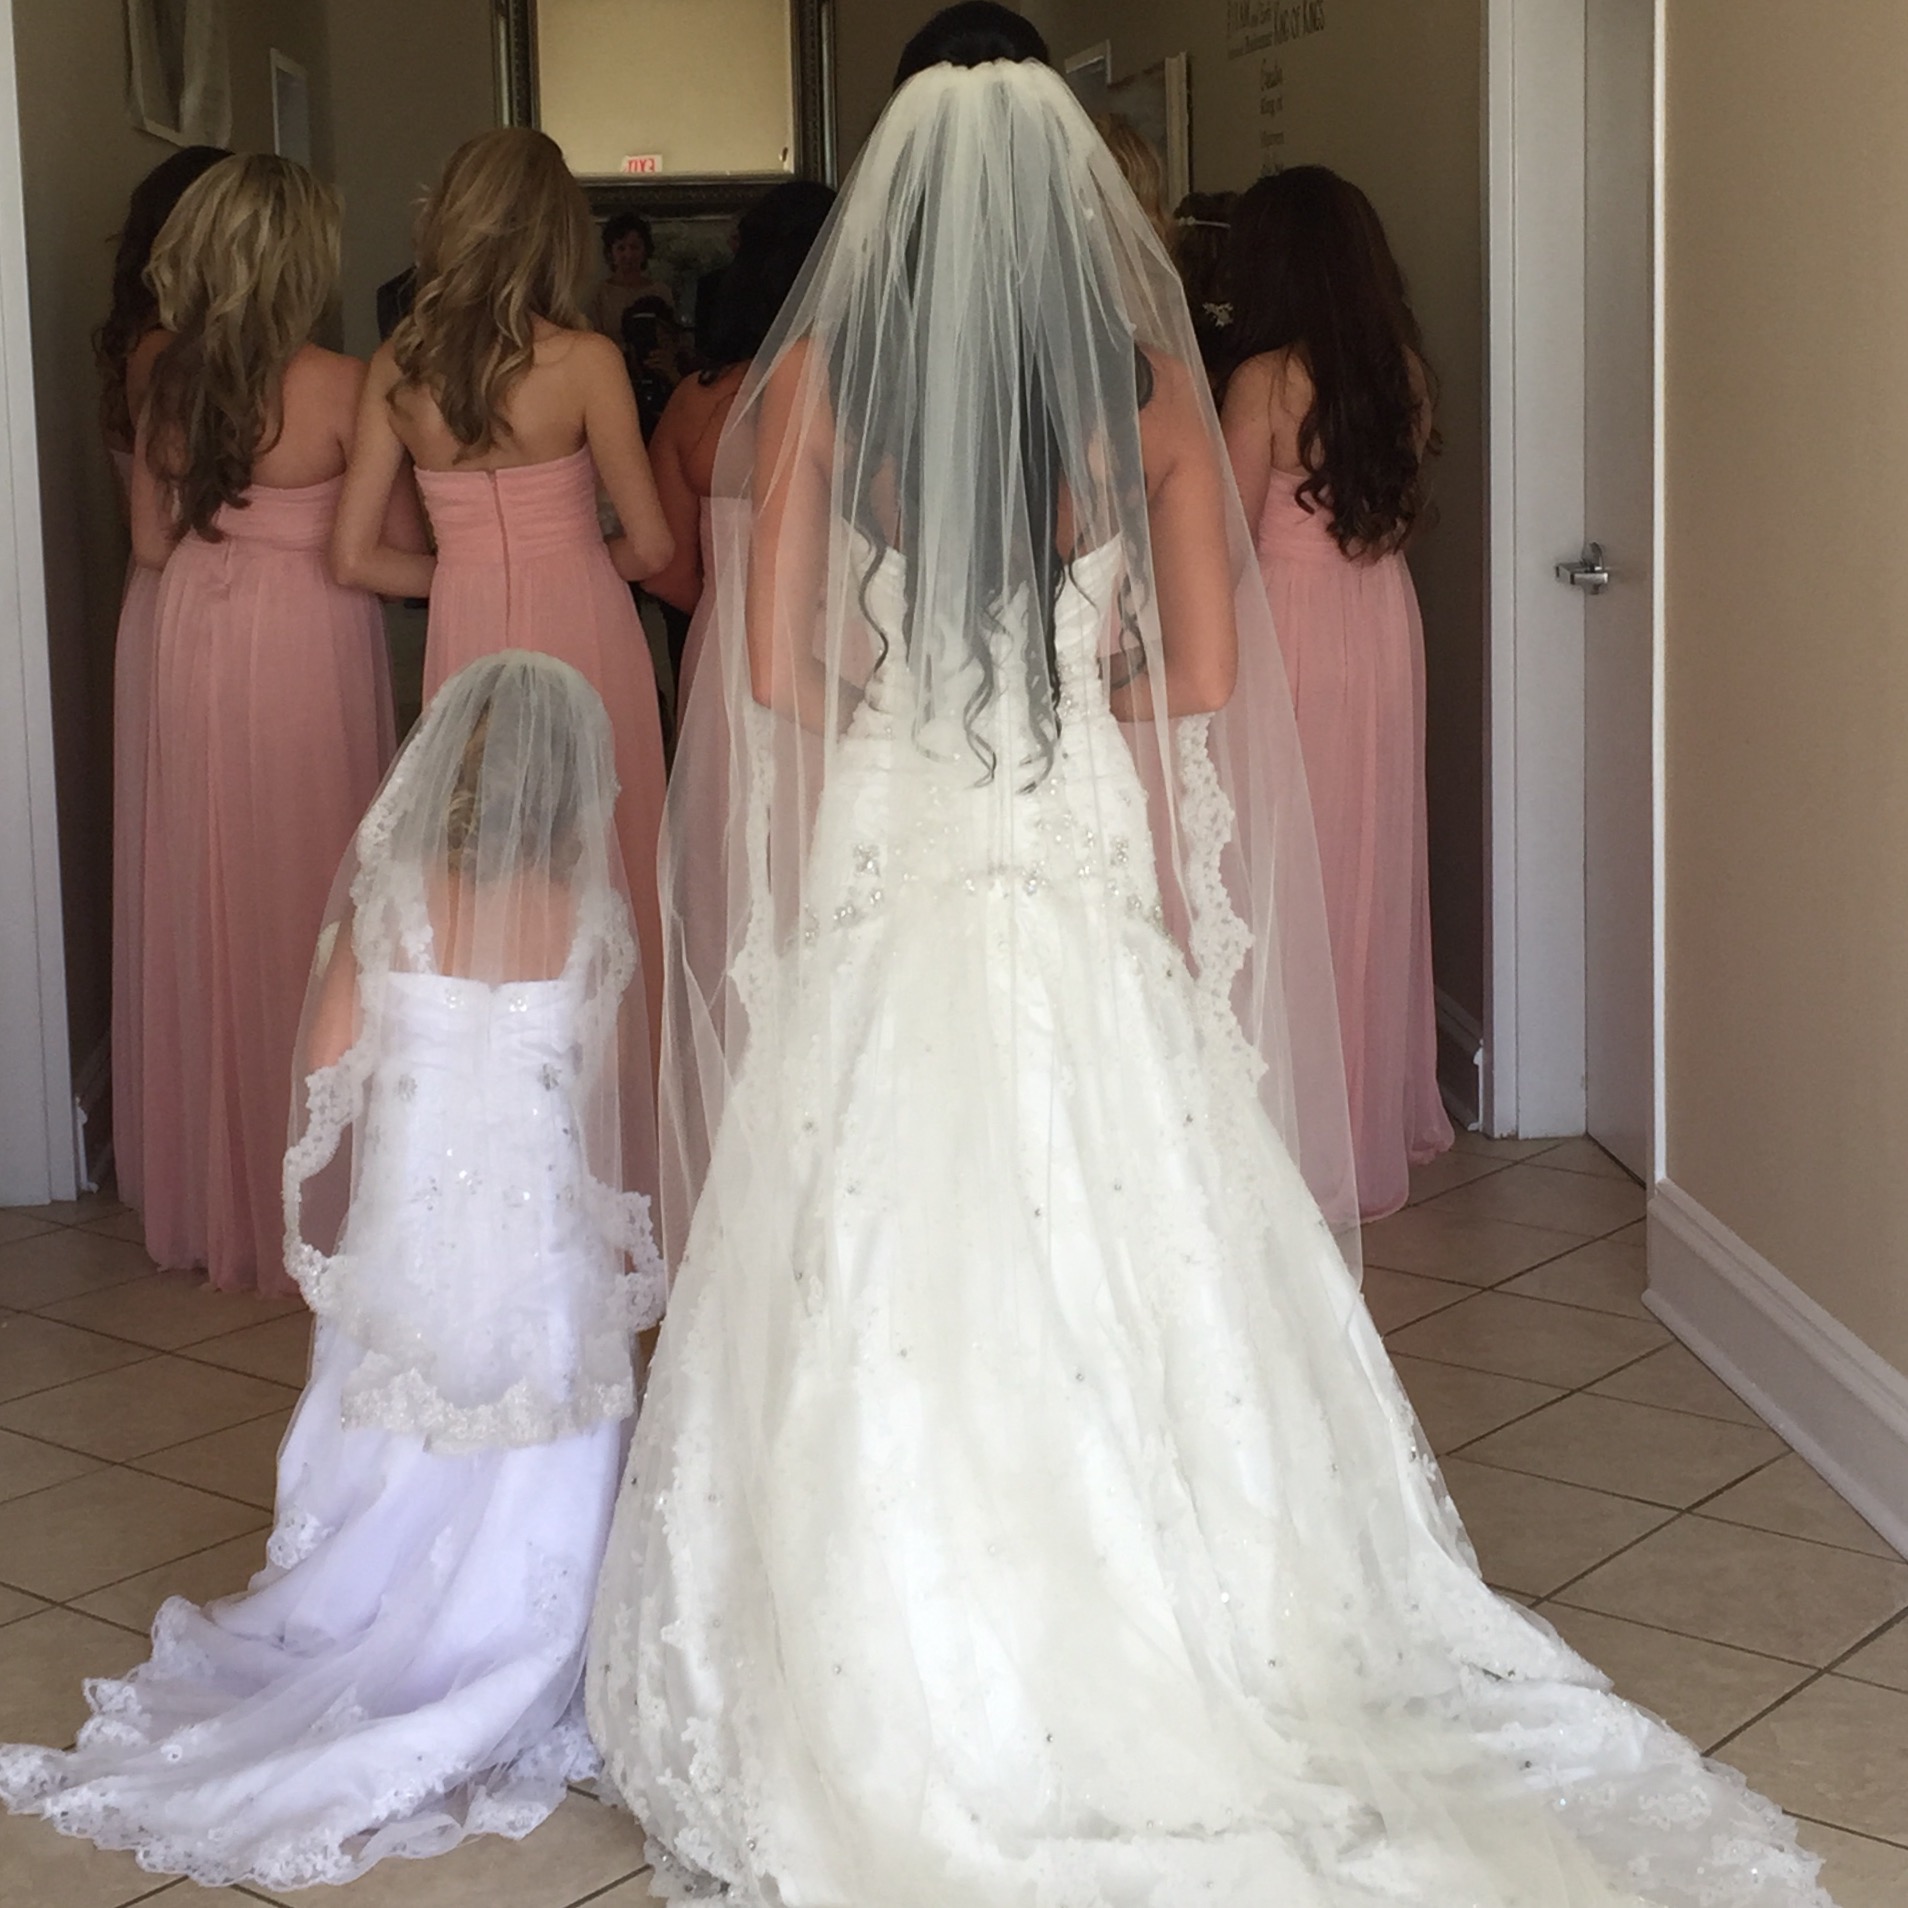 Bride and matching flower girl dresses